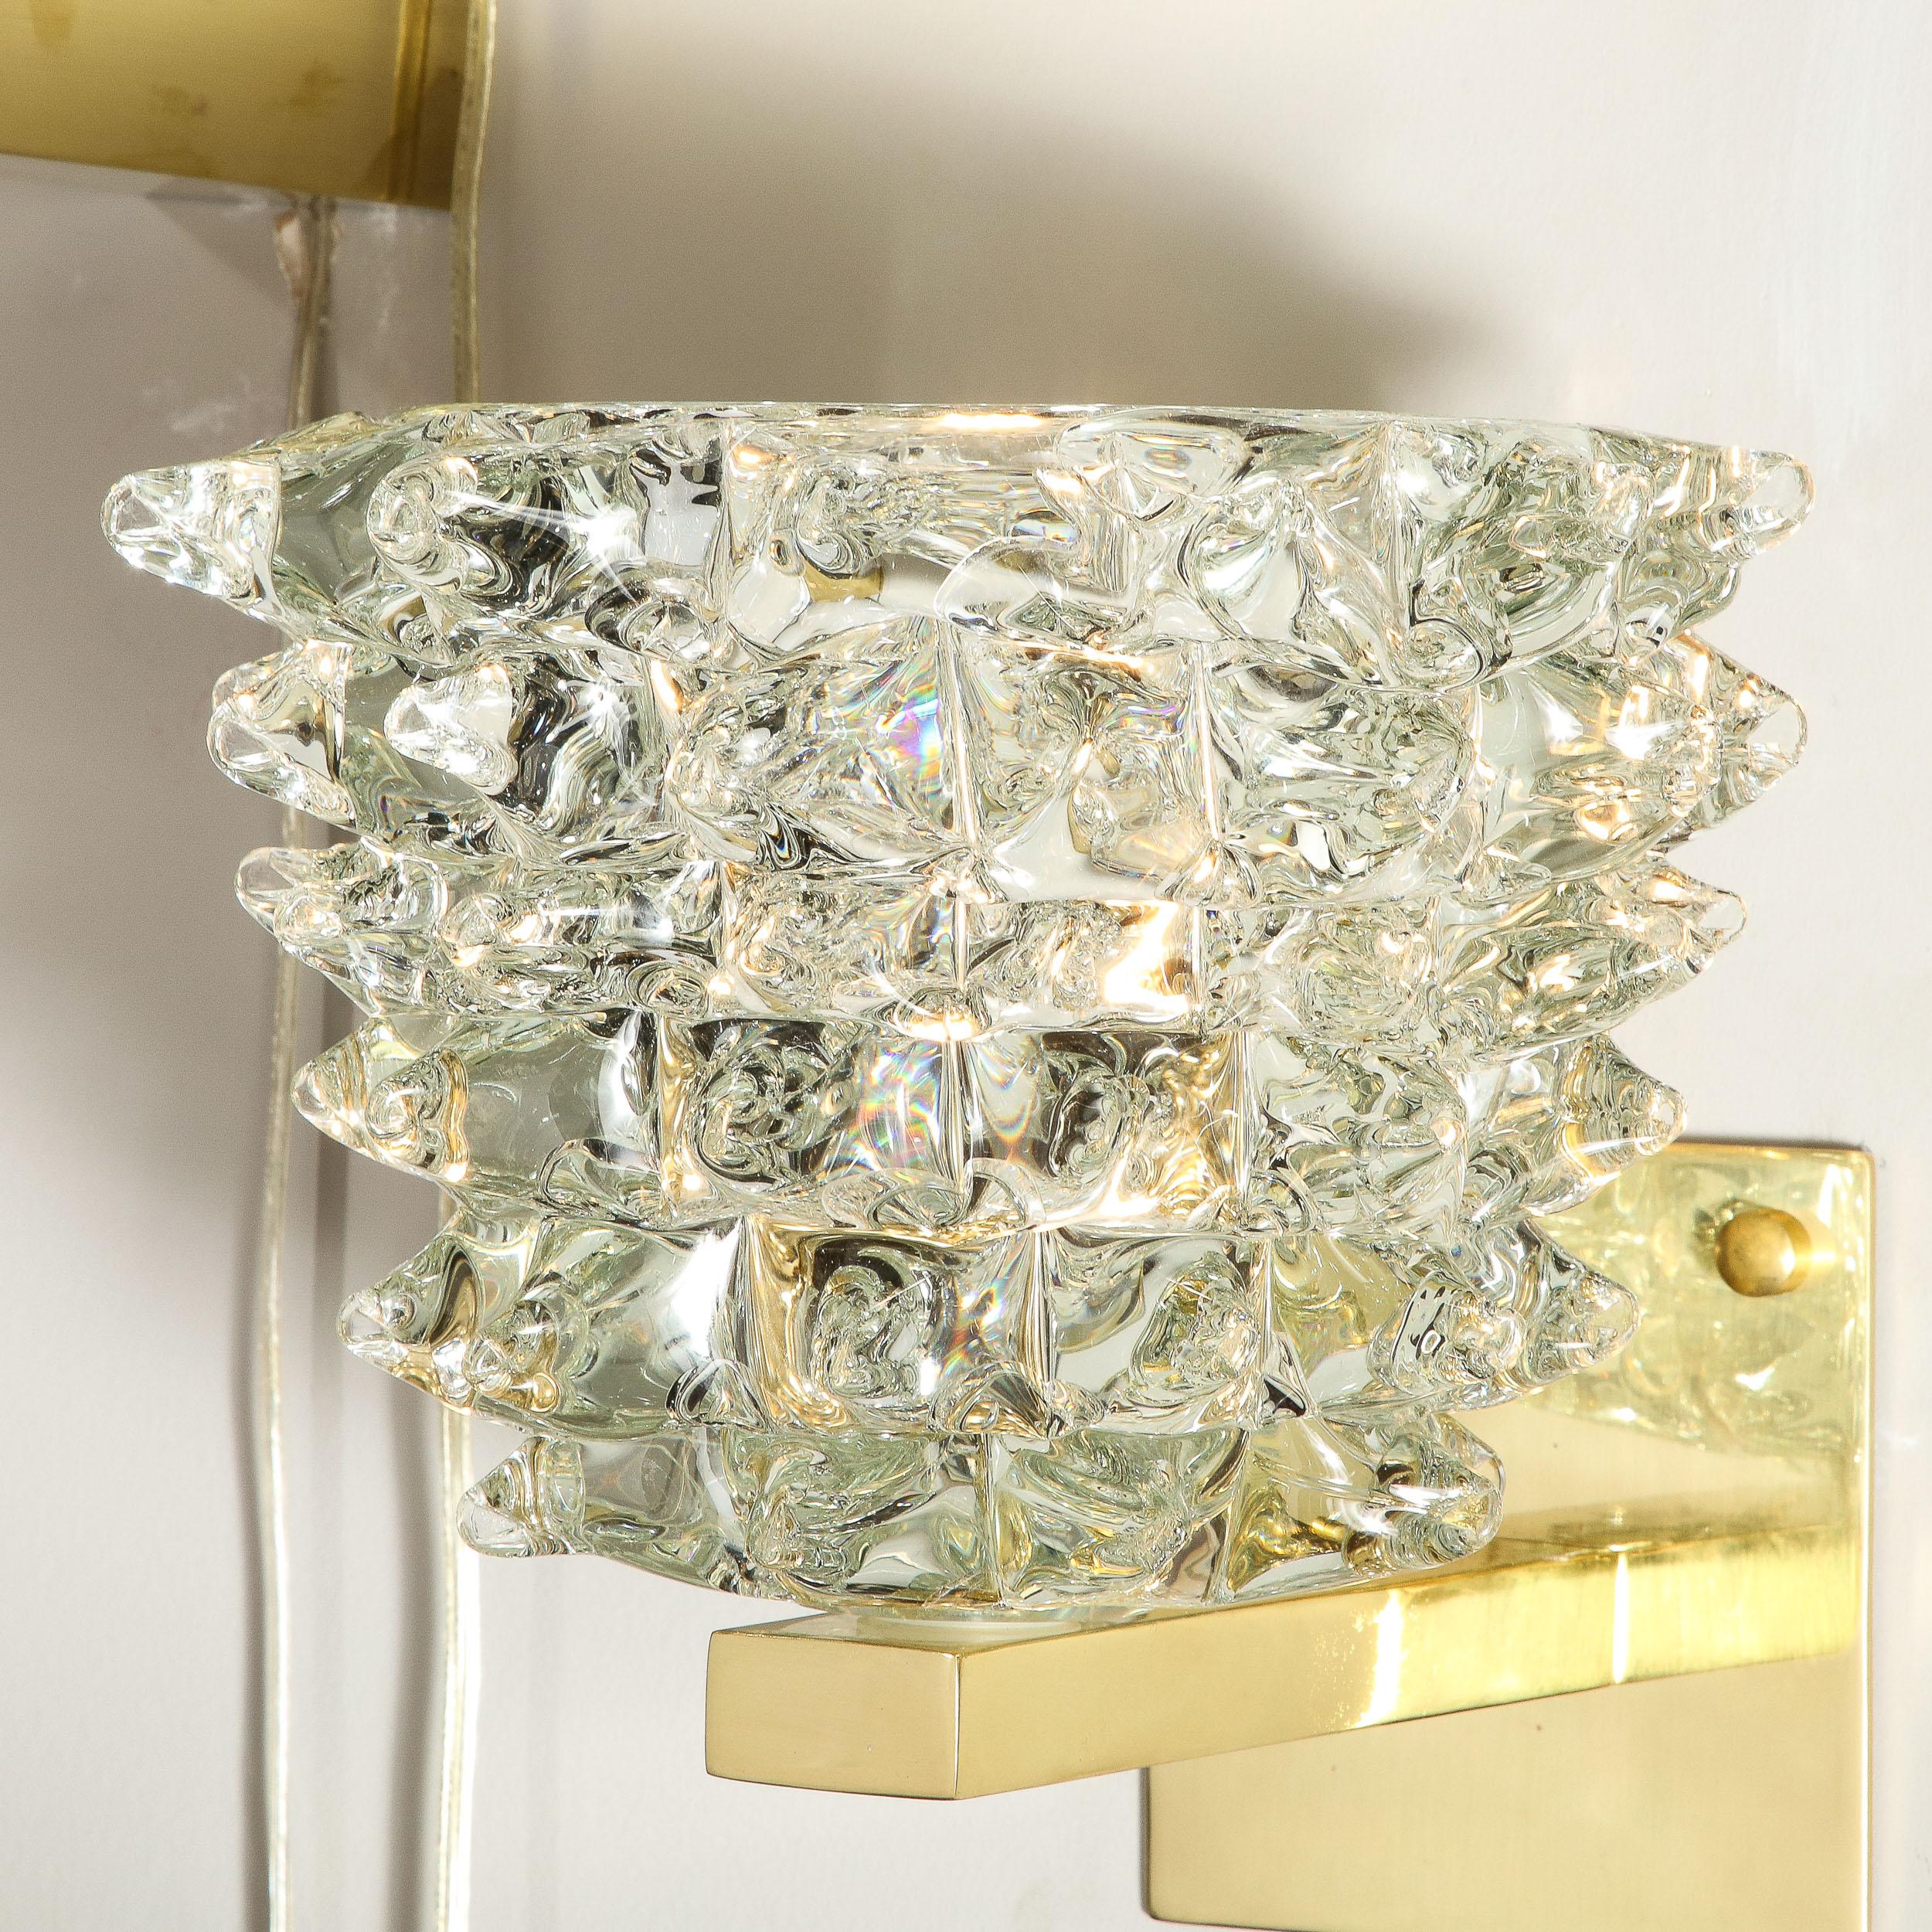 Pair of Modernist Transparent Murano Glass & Brass Sconces w/ Rostrato Detailing For Sale 3